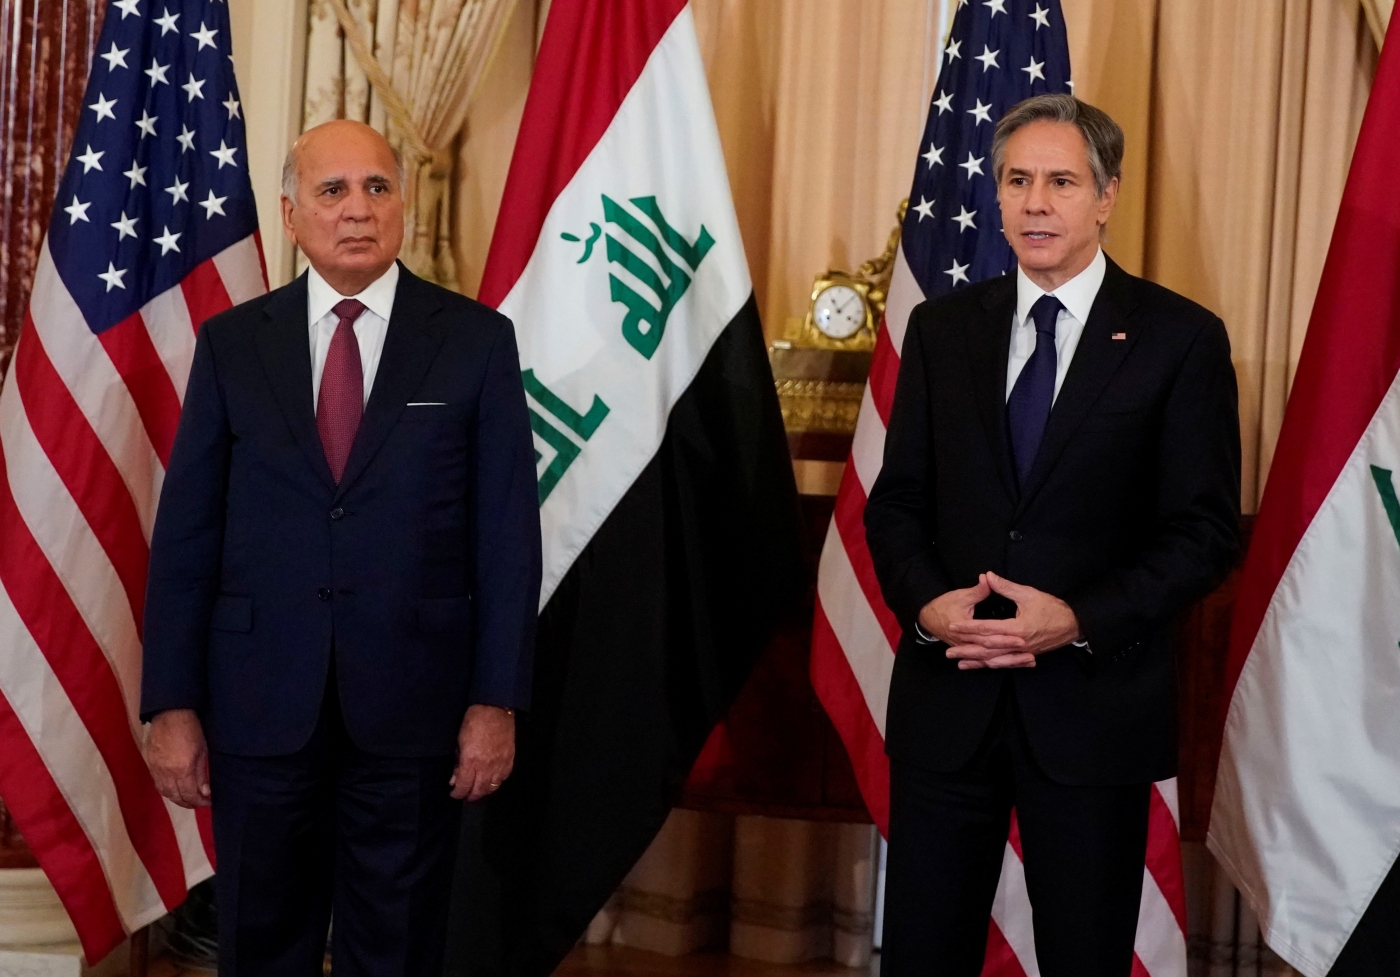 Iraq’s Foreign Minister Fuad Hussein (L) and US Secretary of State Antony Blinken